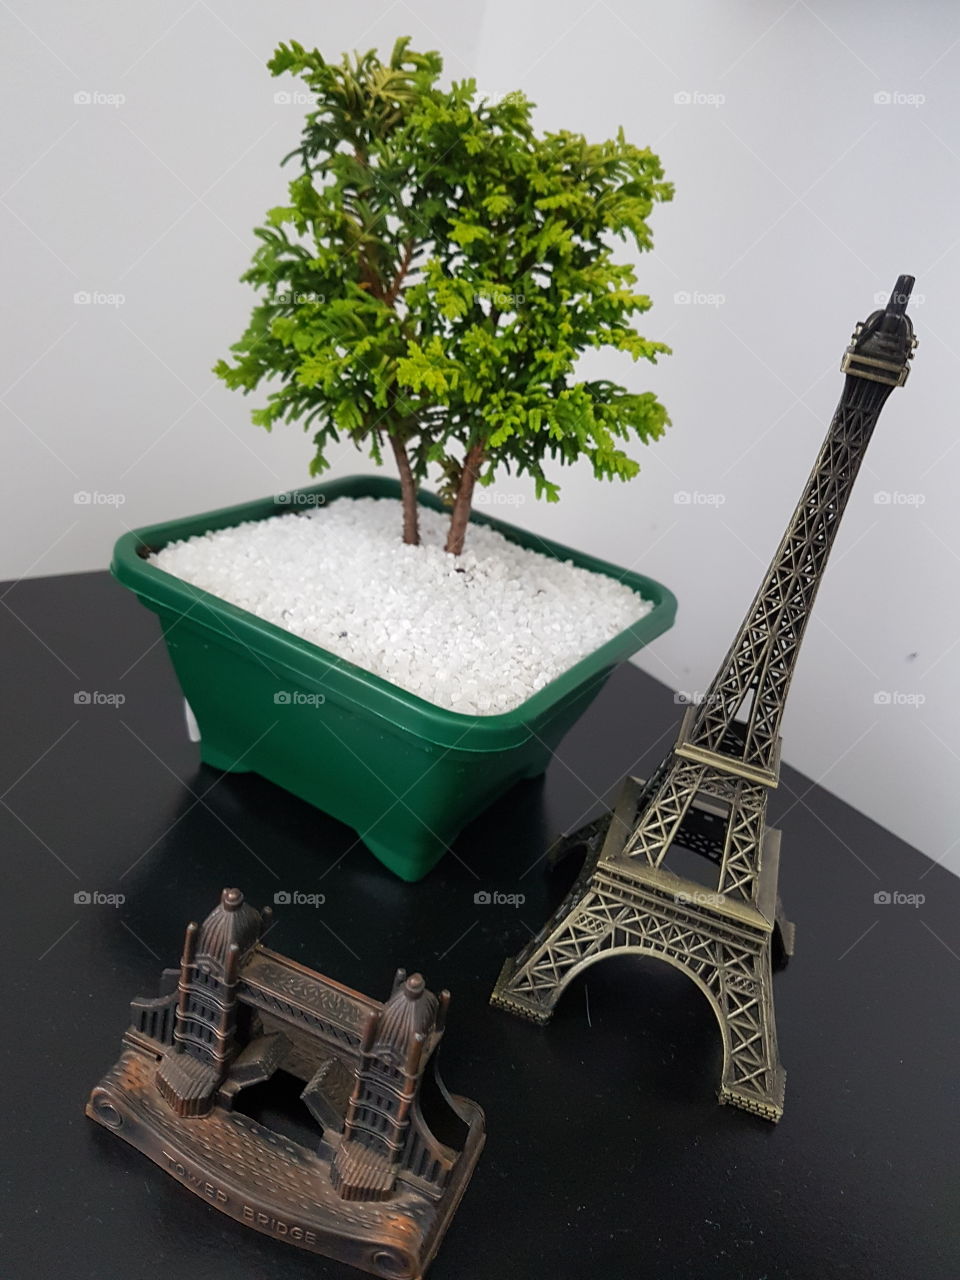 Bonsai with ornaments